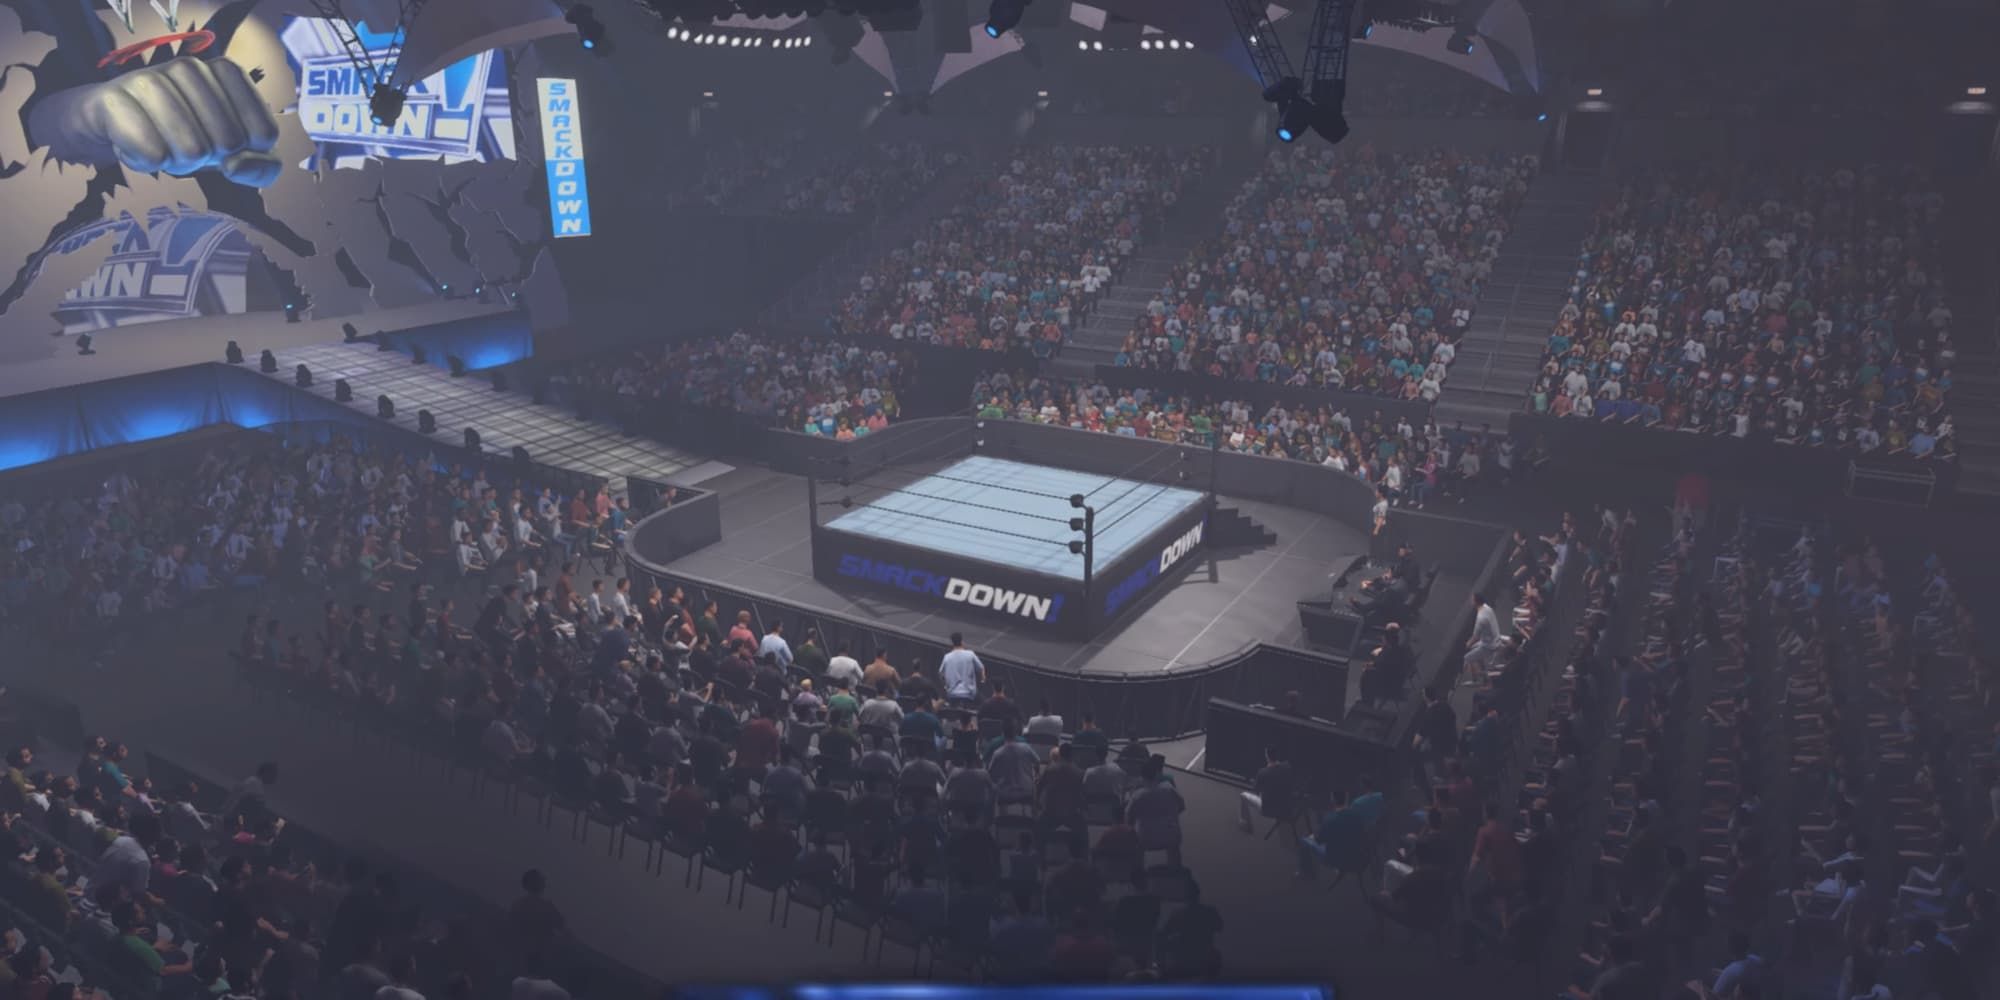 The SmackDown 2002 in WWE 2K23 is filled with audience members and has the iconic fist above the entrance area.